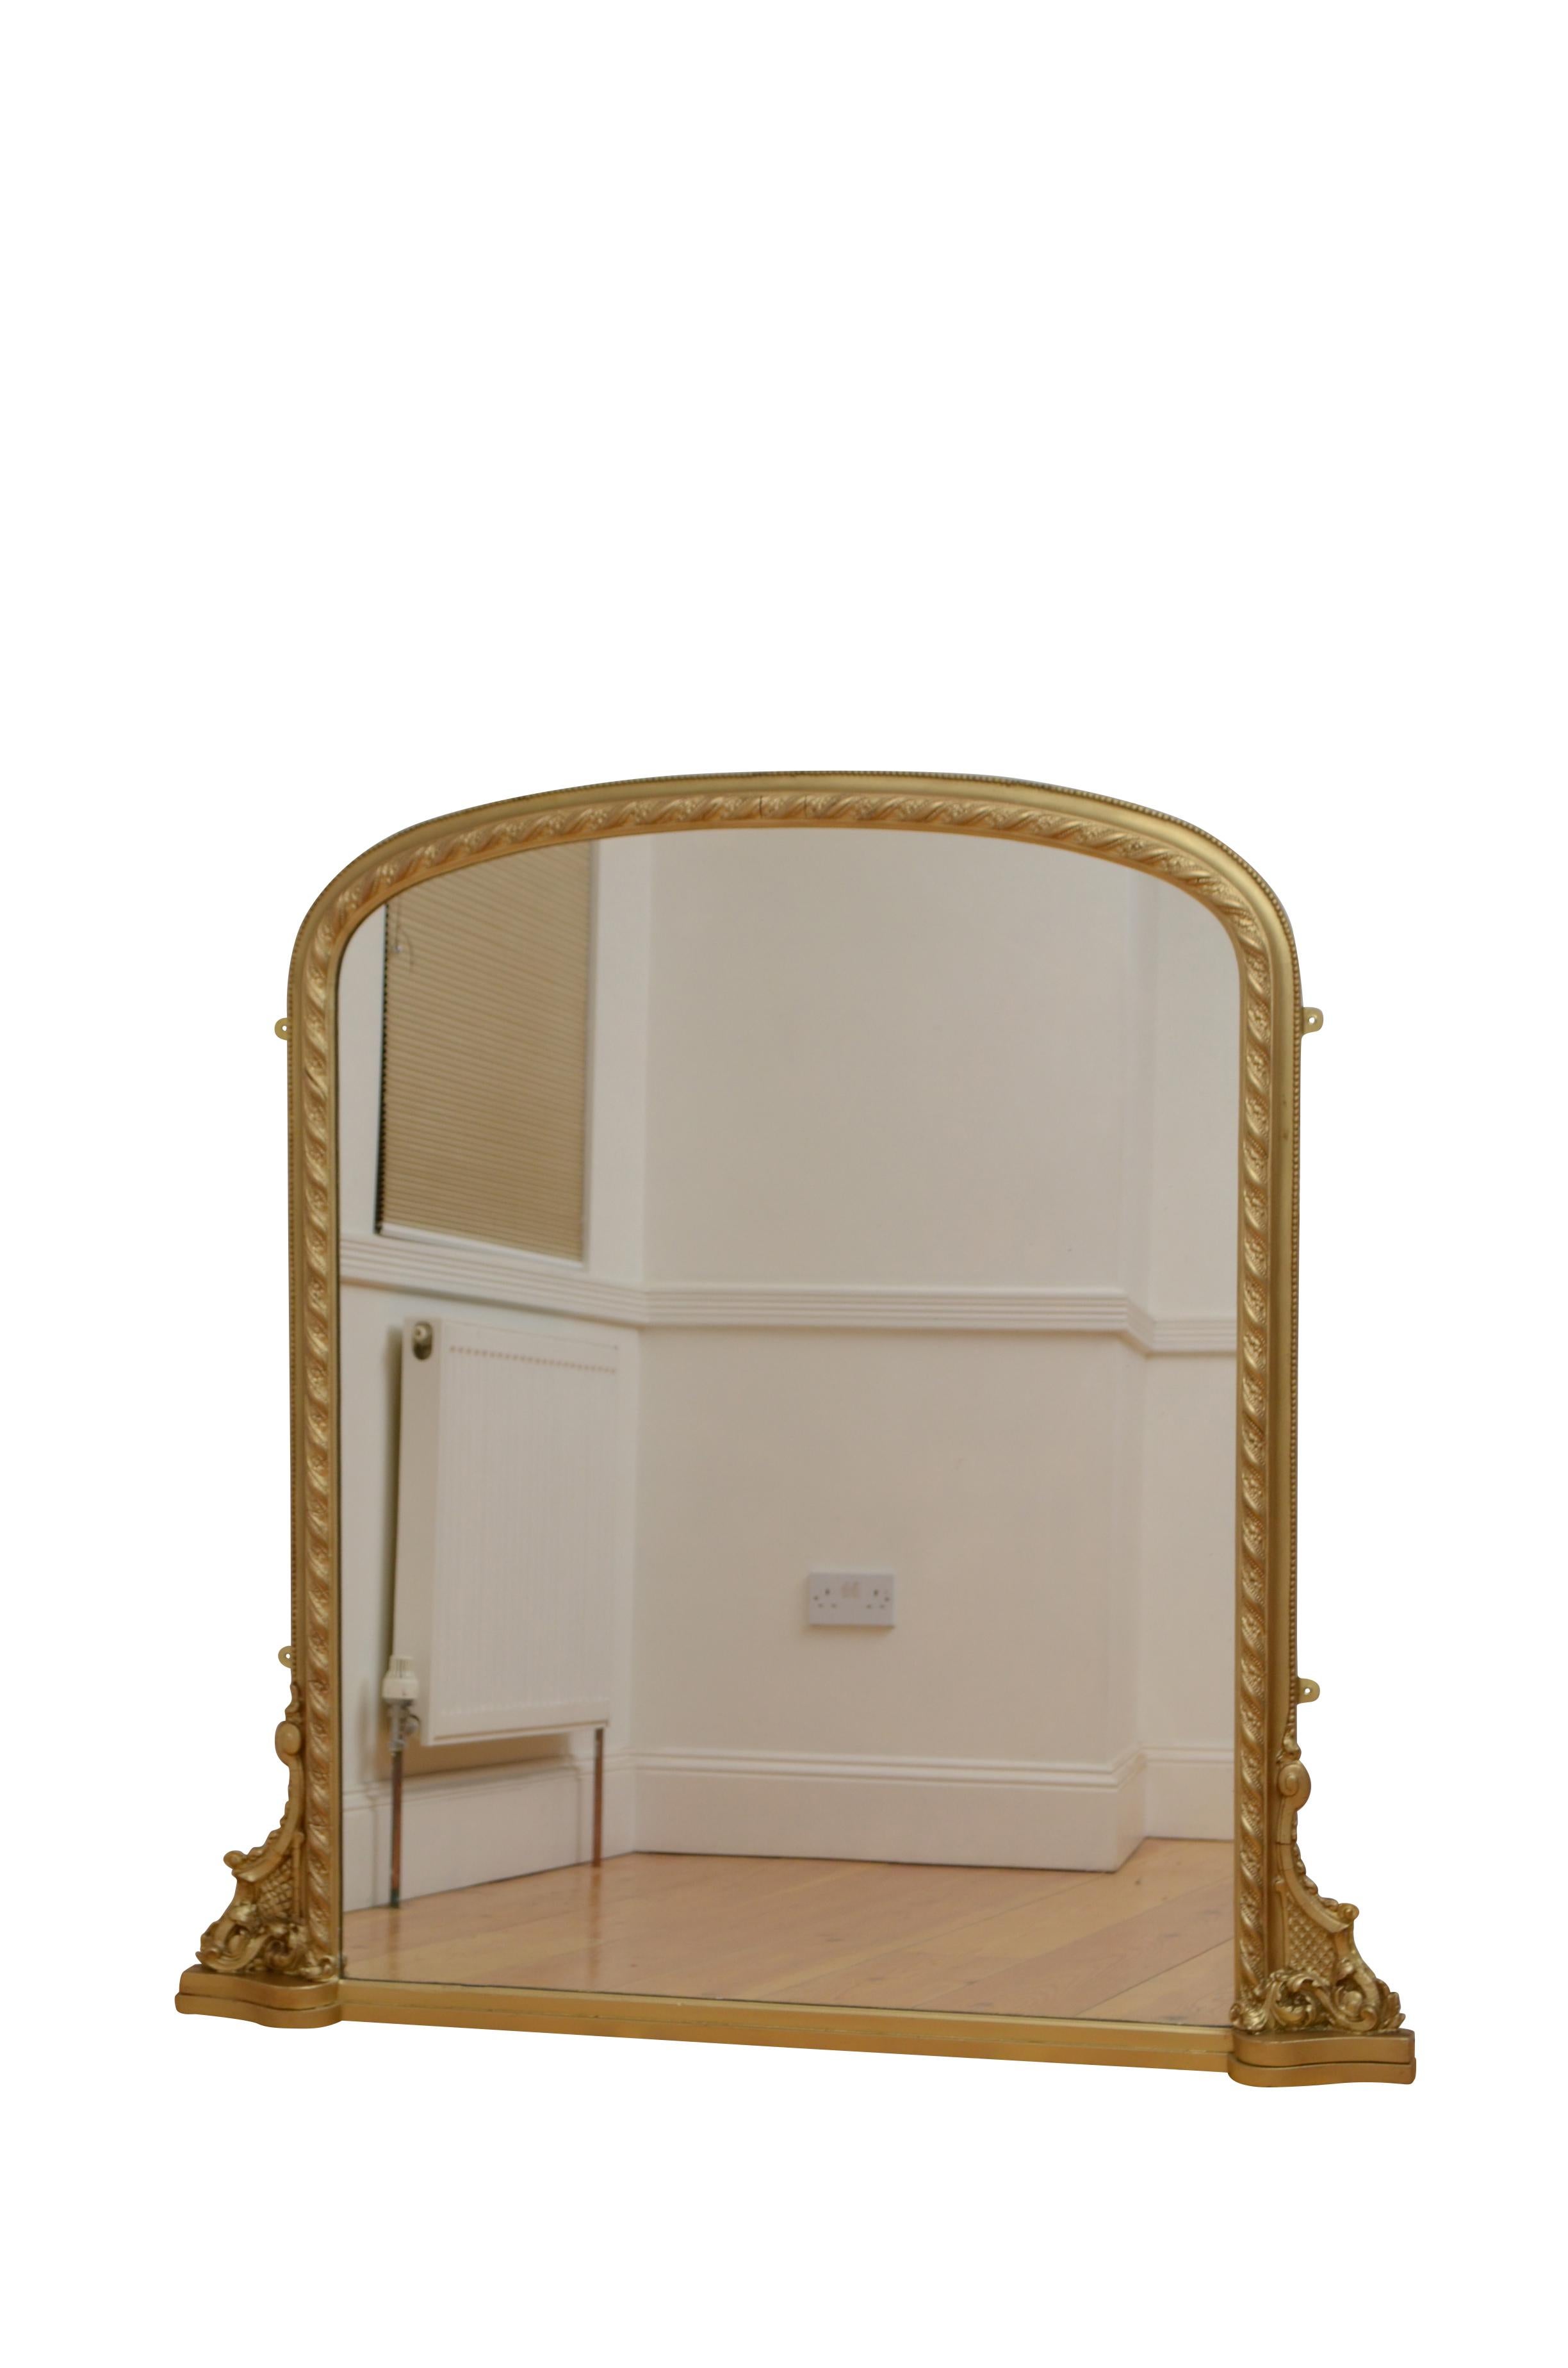 K0553 English Victorian overmantel mirror, having a replacement glass in beaded and carved gesso frame with leafy scrolls to the base. This antique mirror has been refinished in the past and is ready to place at home. Fitted with four hanging